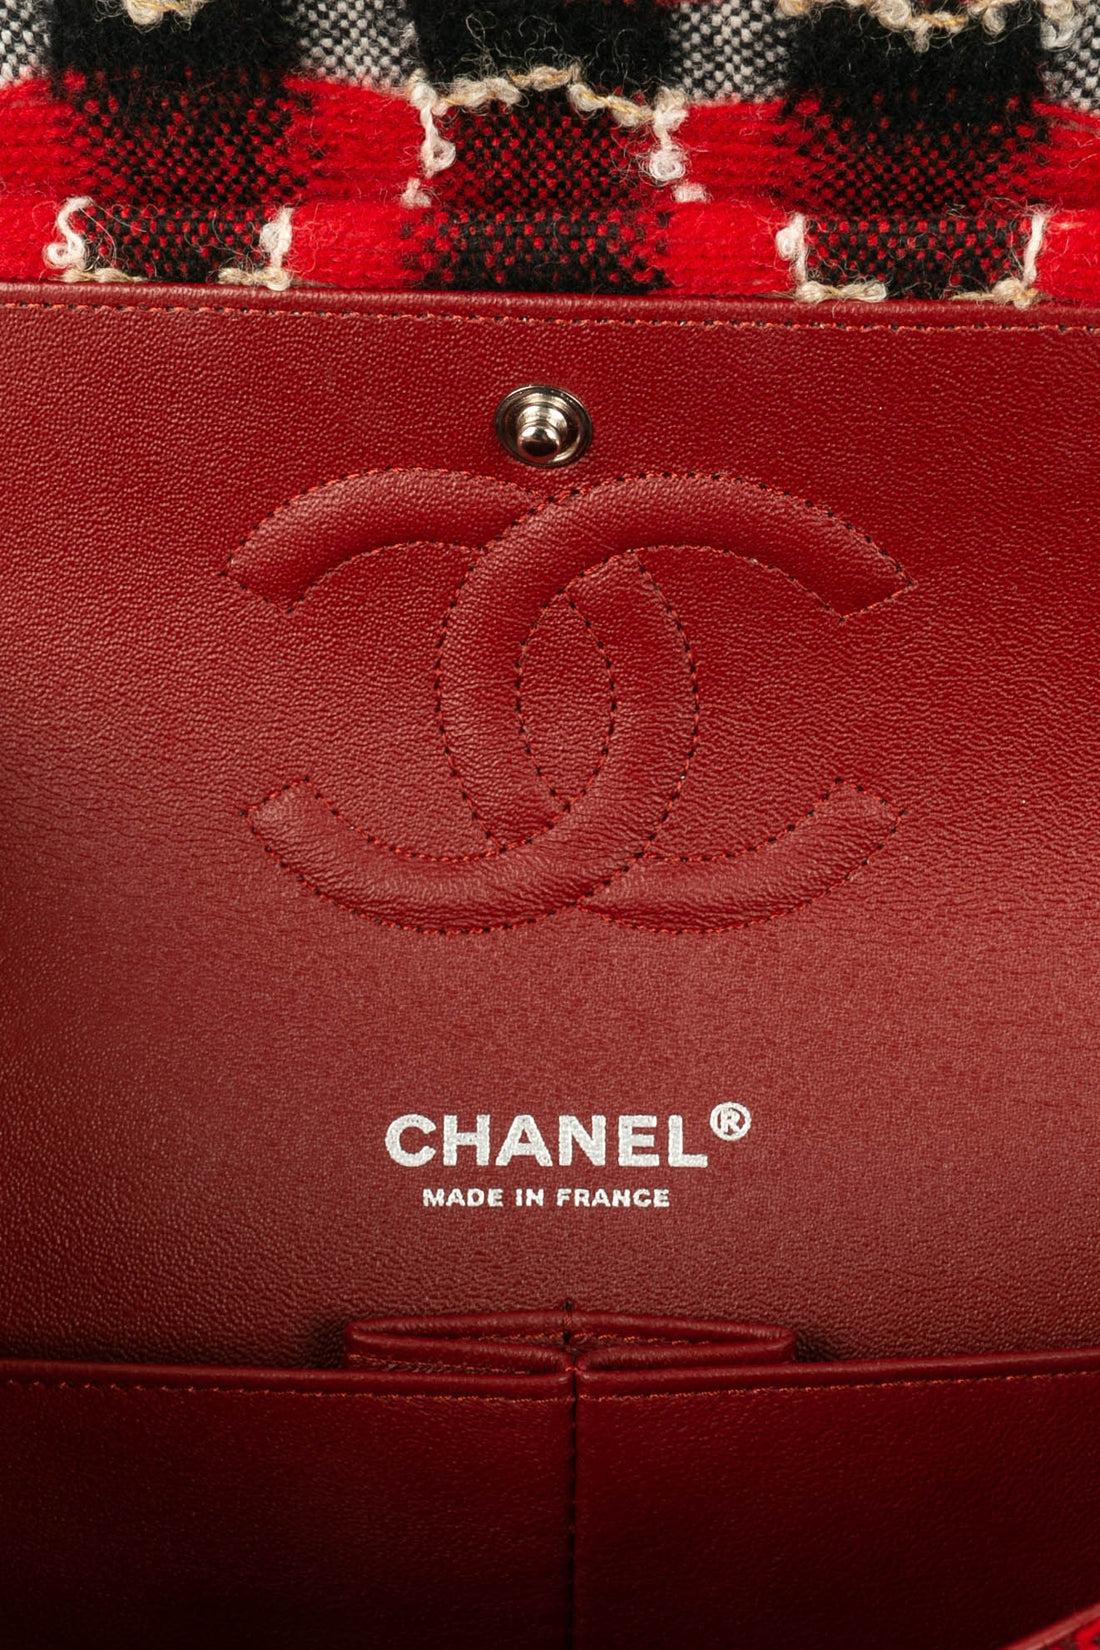 Chanel Timeless Wool and Leather Bag, 2013/2014 For Sale 7